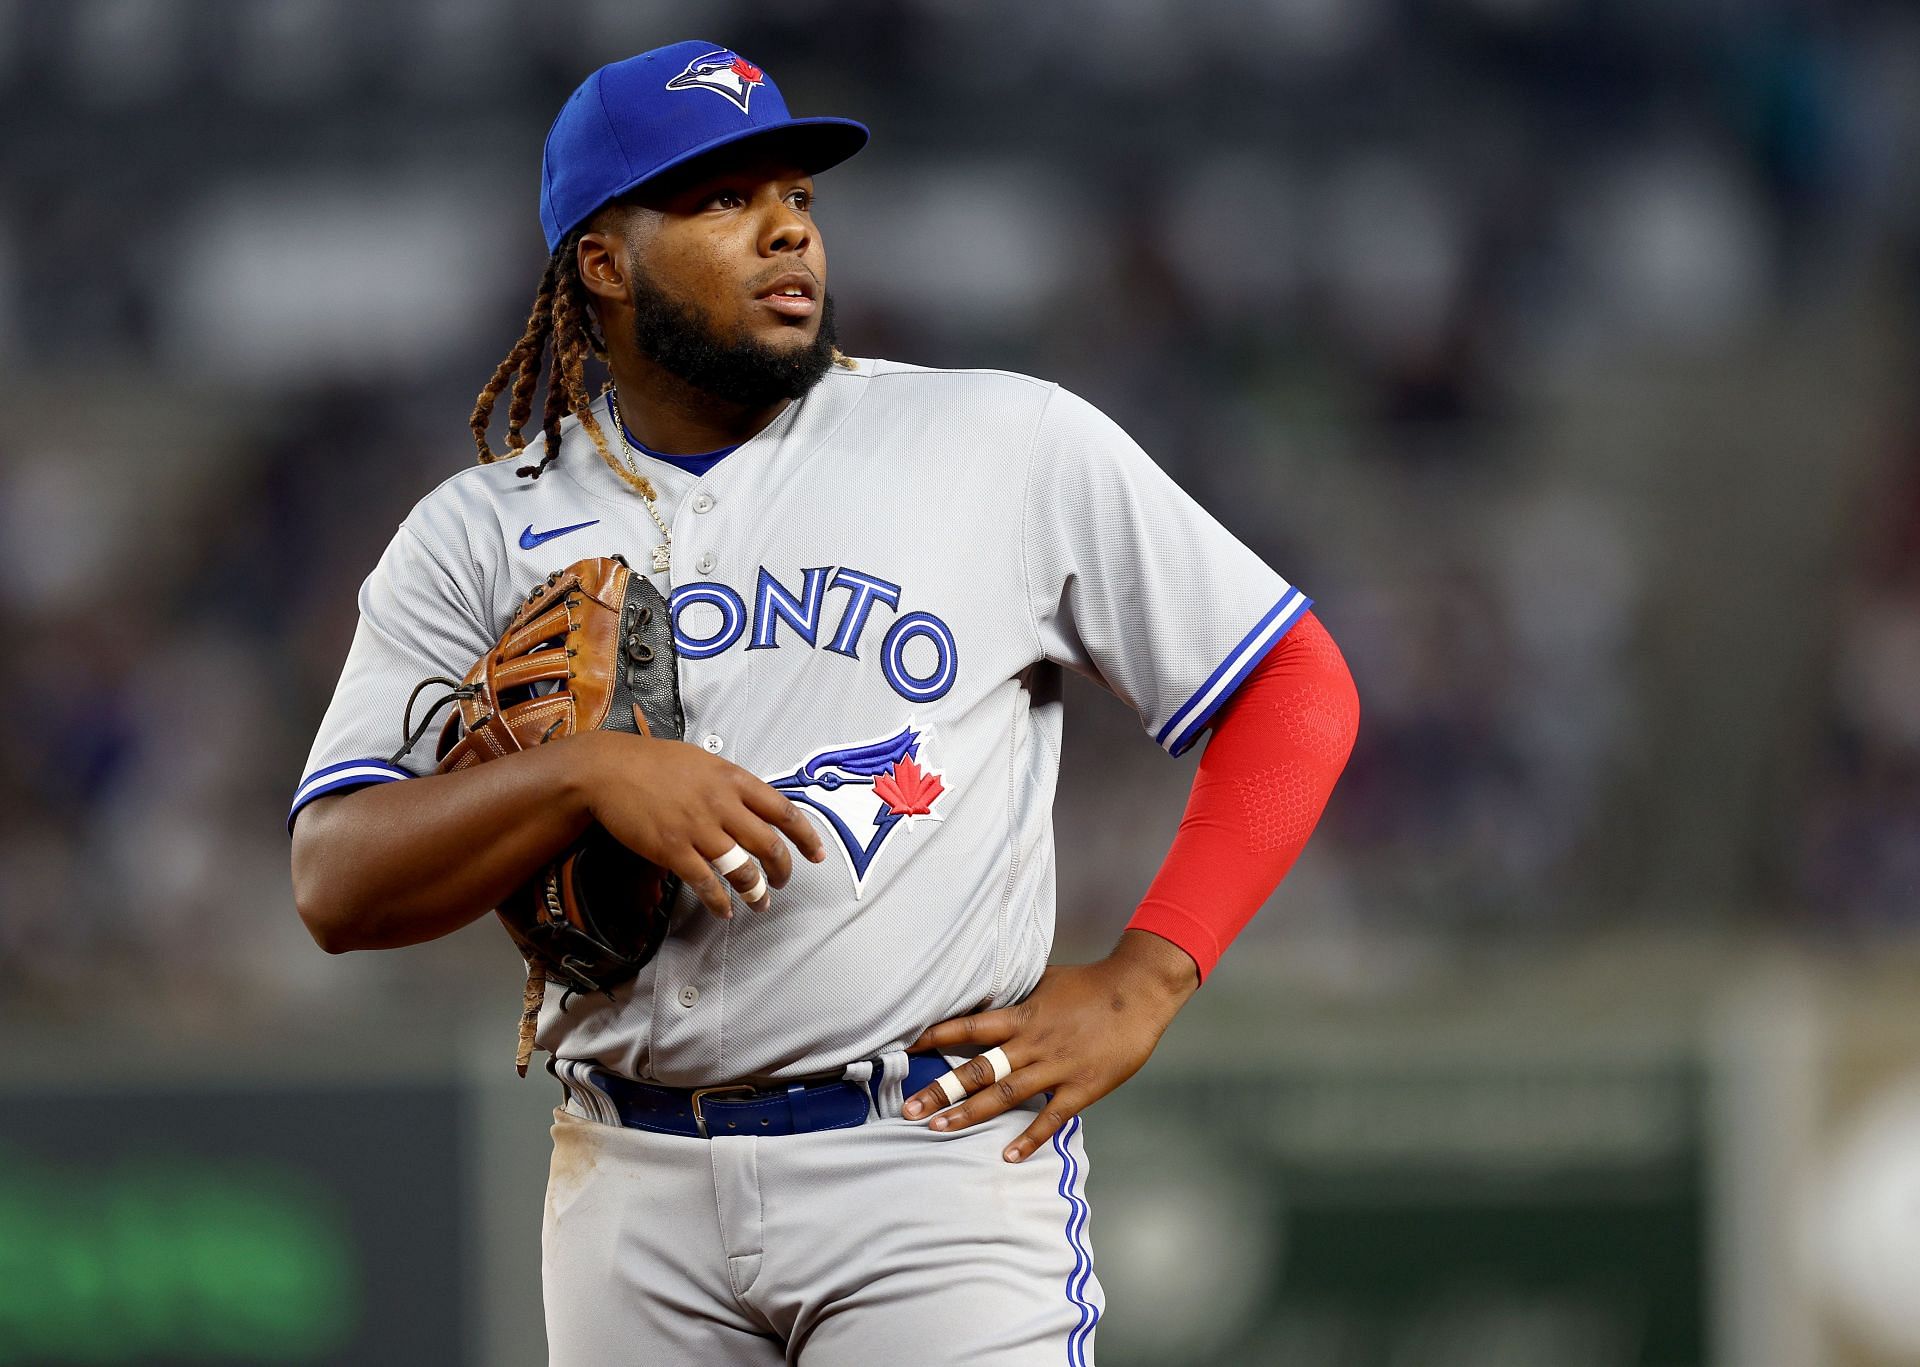 Vlad Guerrero Jr. looks on in the bottom of the second inning of the game against the New York Yankees in April, 2022